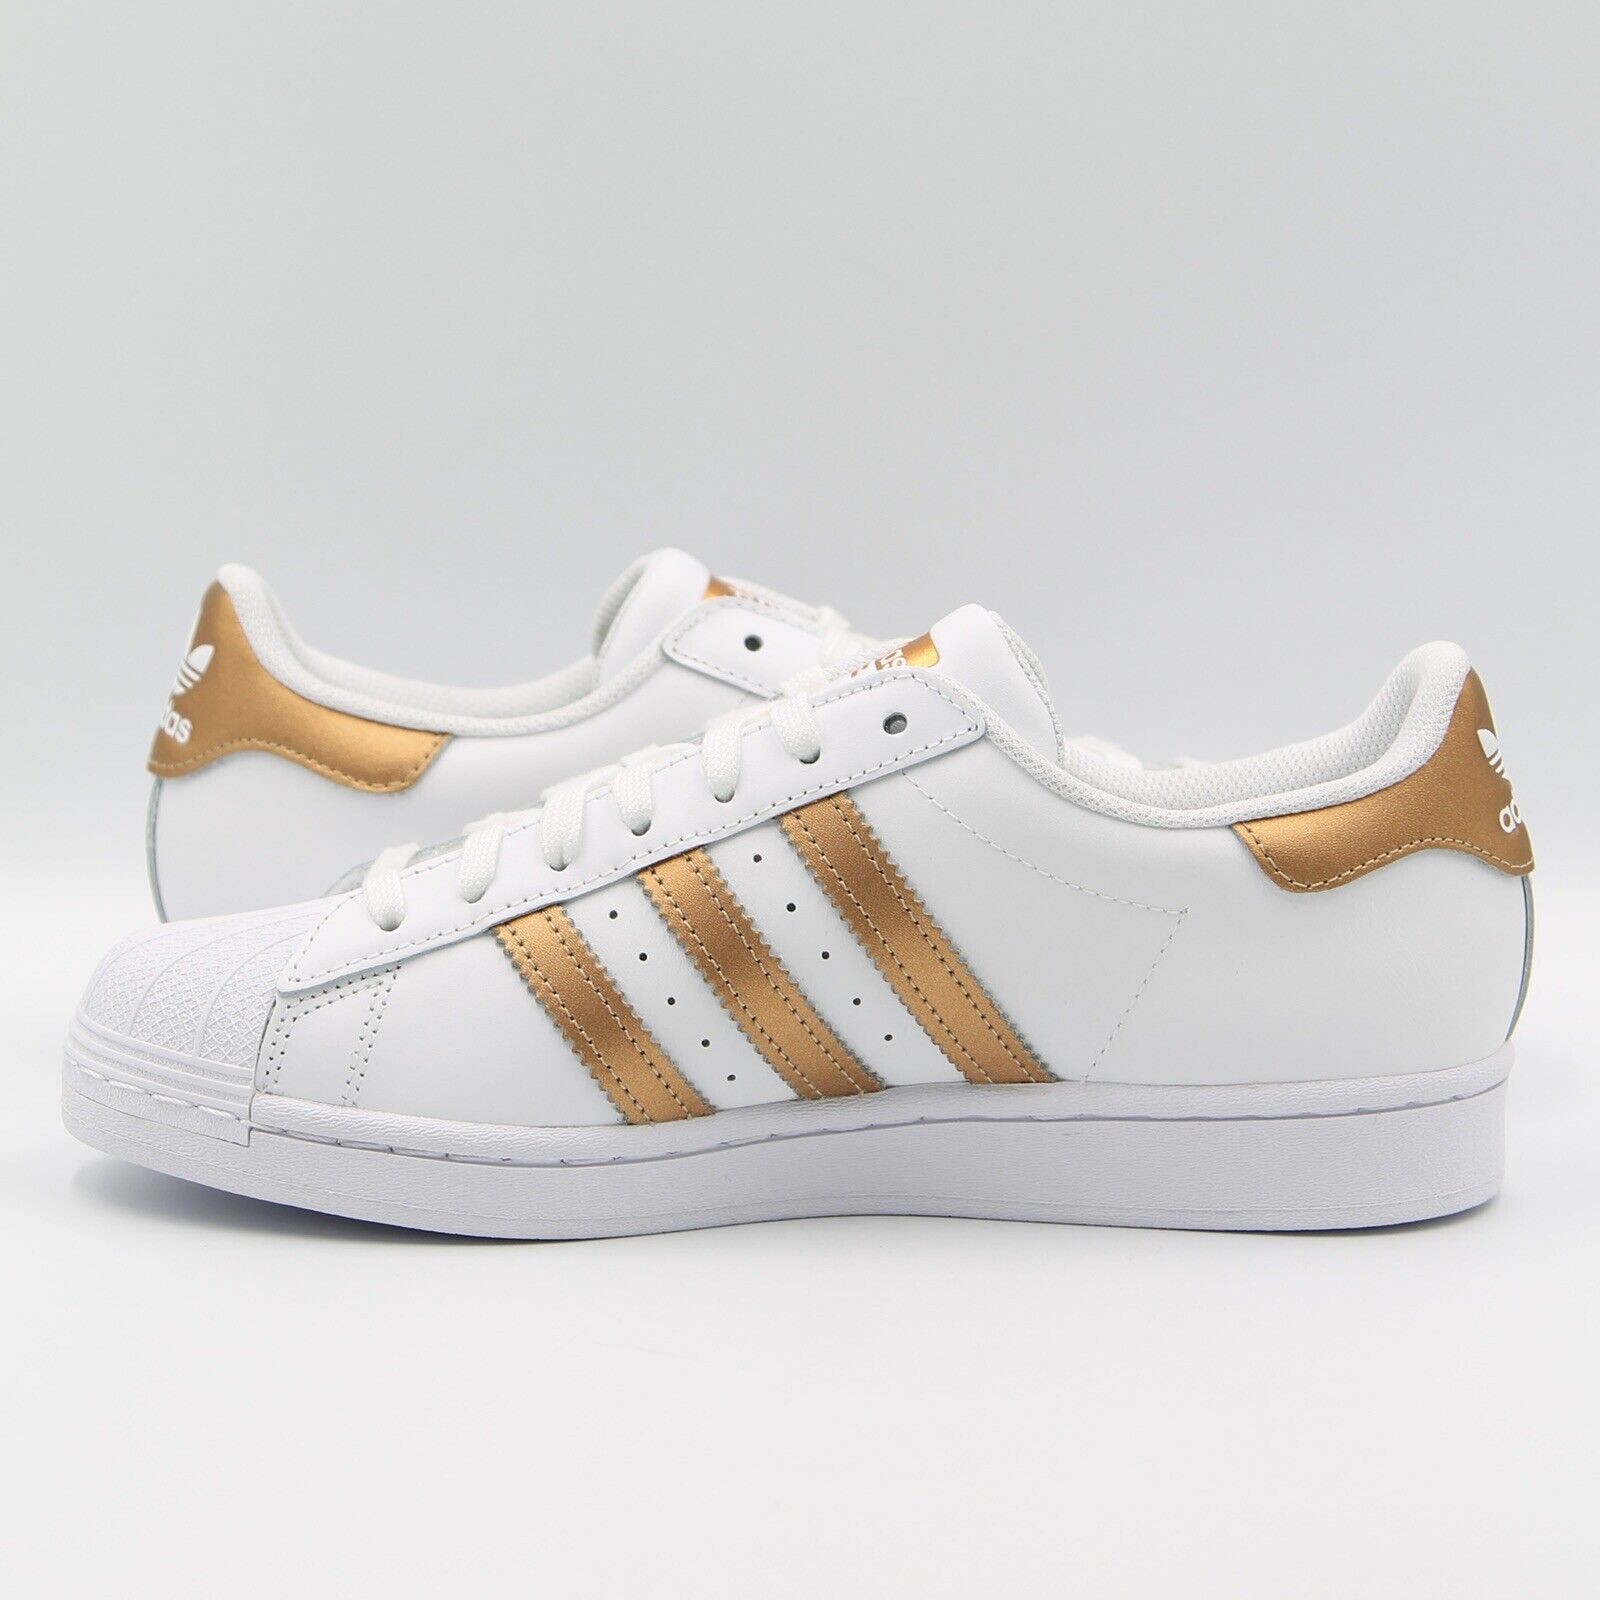 Adidas Superstar Women's Athletic Sneaker Casual Shoe White Copper ...